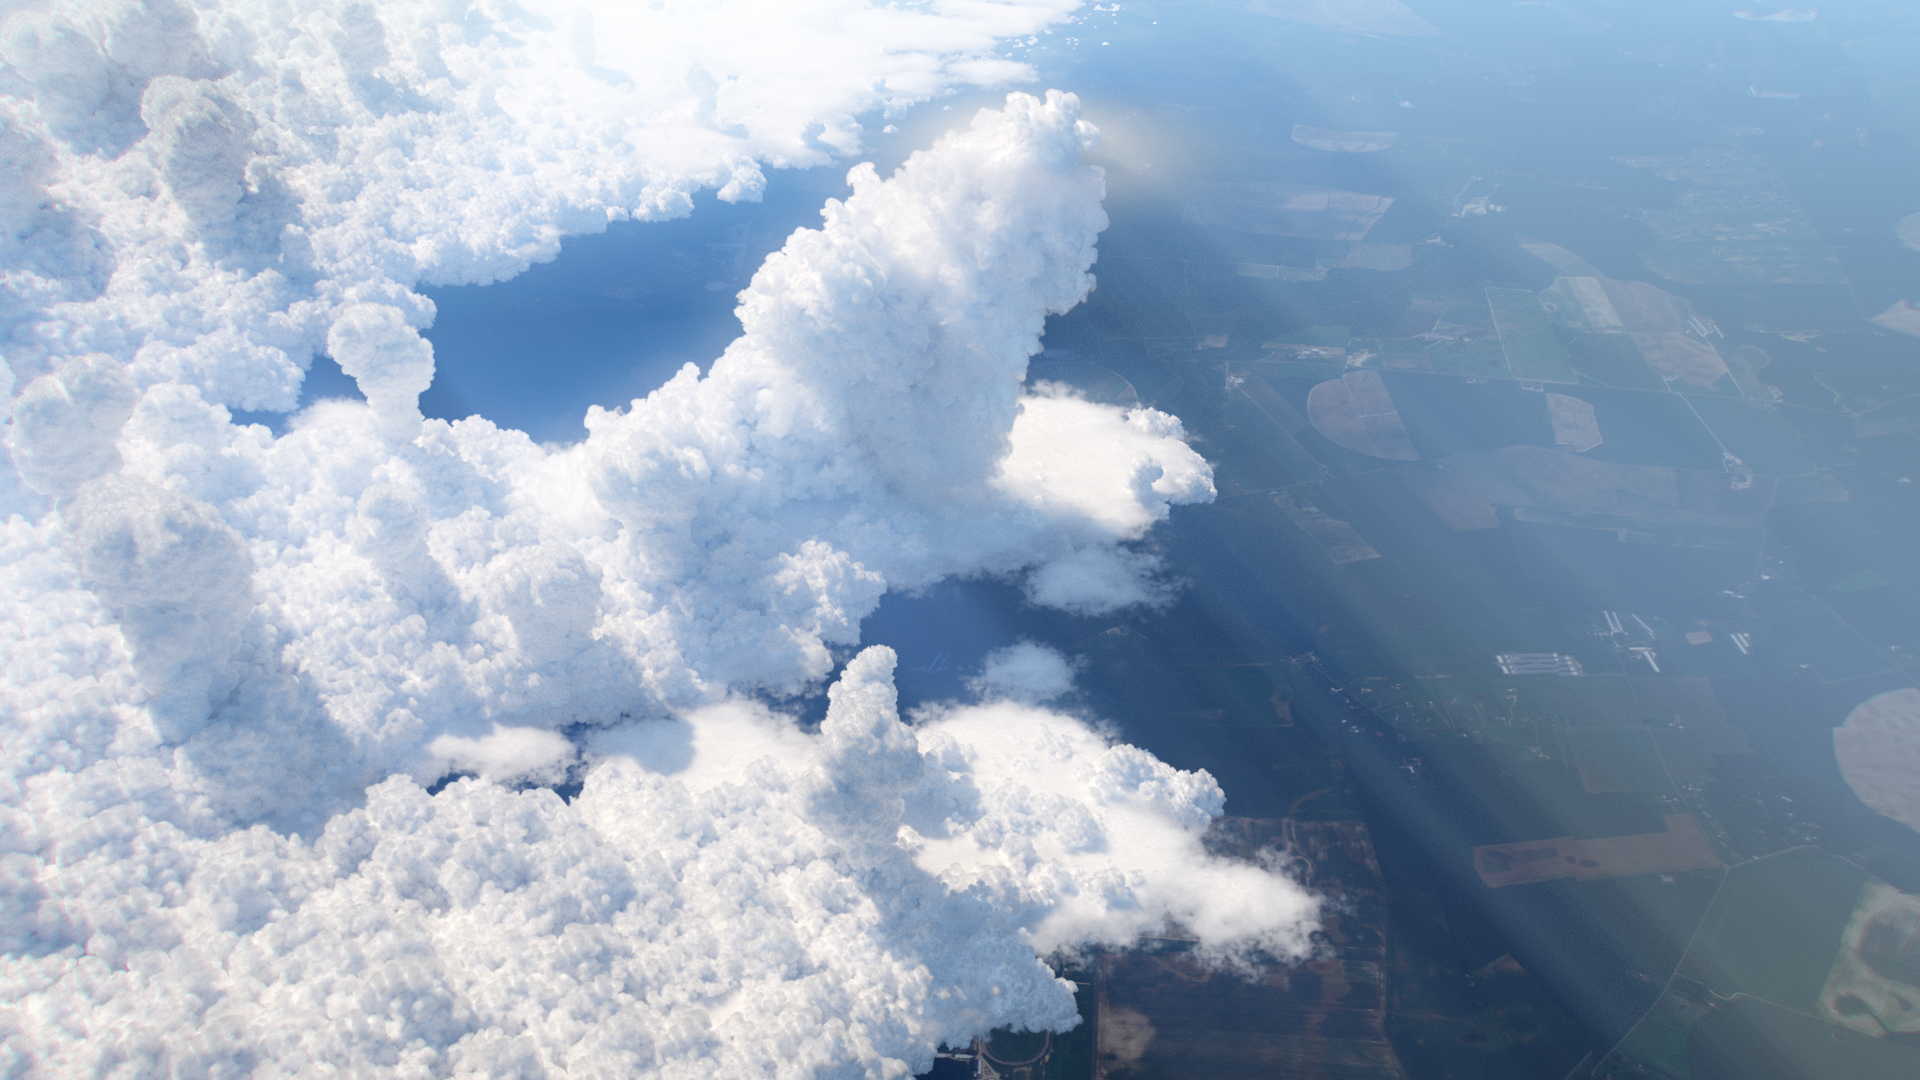 A common cloudscape that can be seen from a commercial airliner